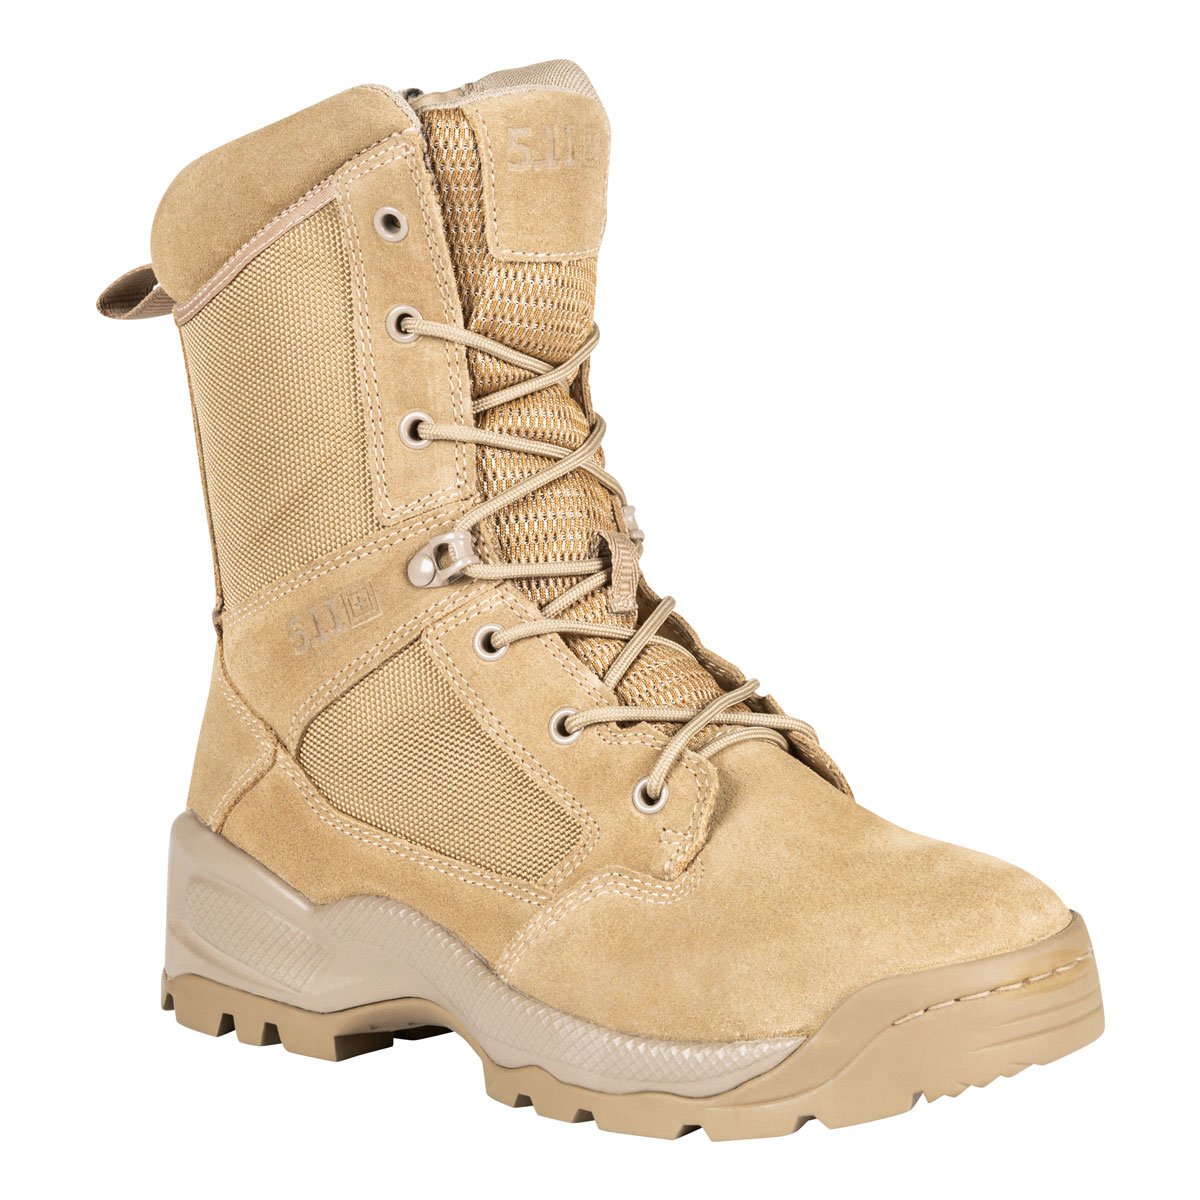 5.11 Tactical ATAC 2.0 8 Inches Arid Boot Footwear 5.11 Tactical Tactical Gear Supplier Tactical Distributors Australia